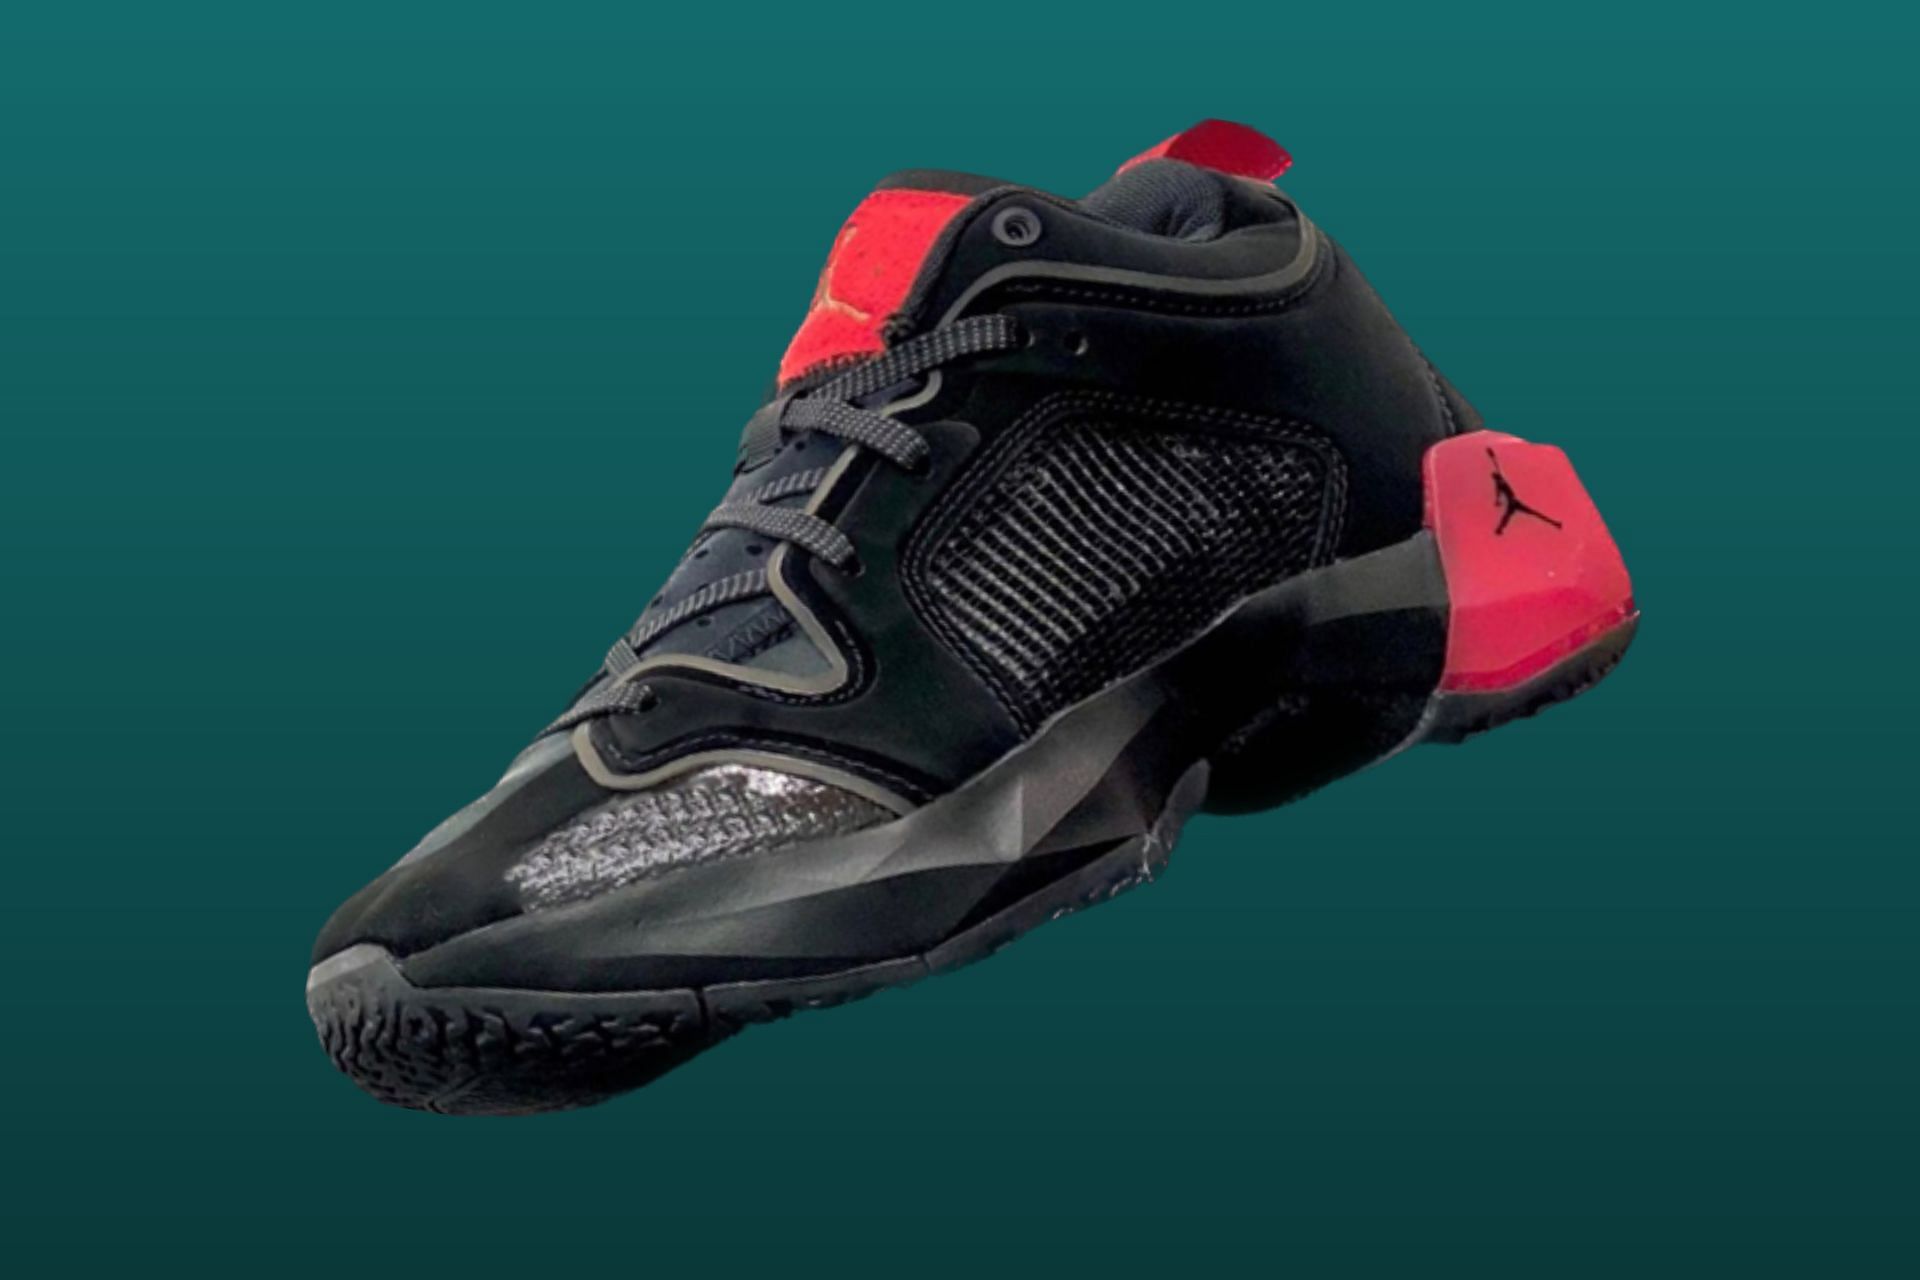 Nike: Air Jordan 37 Low “Bred” shoes: Where to buy, price, and